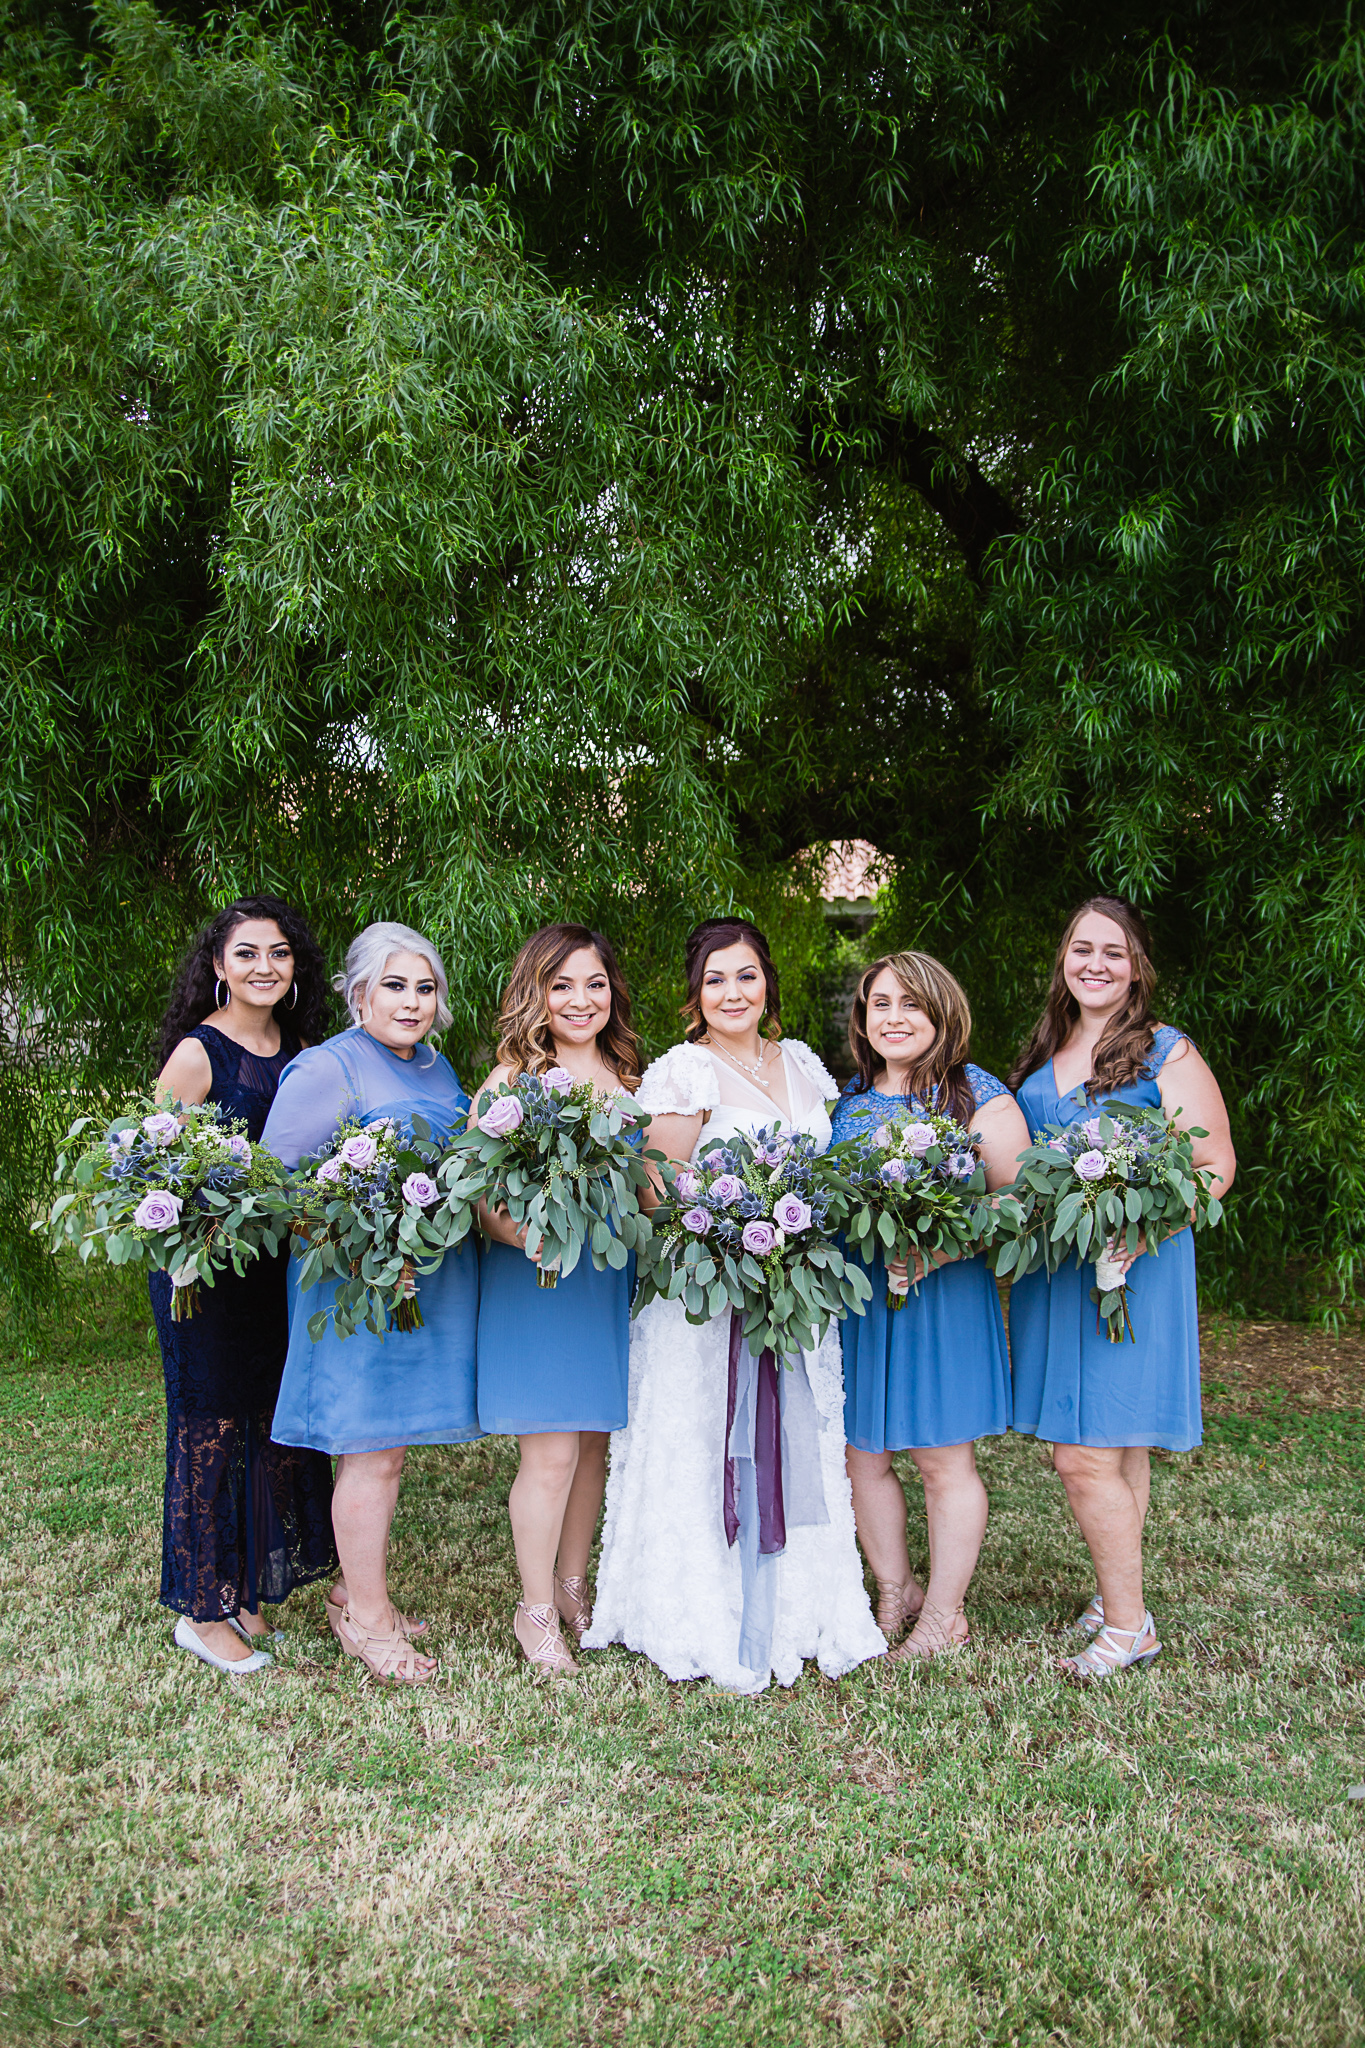 Bride with her bridesmaids and flower girl in dusty blue and navy by Arizona wedding photographers PMA Photography.